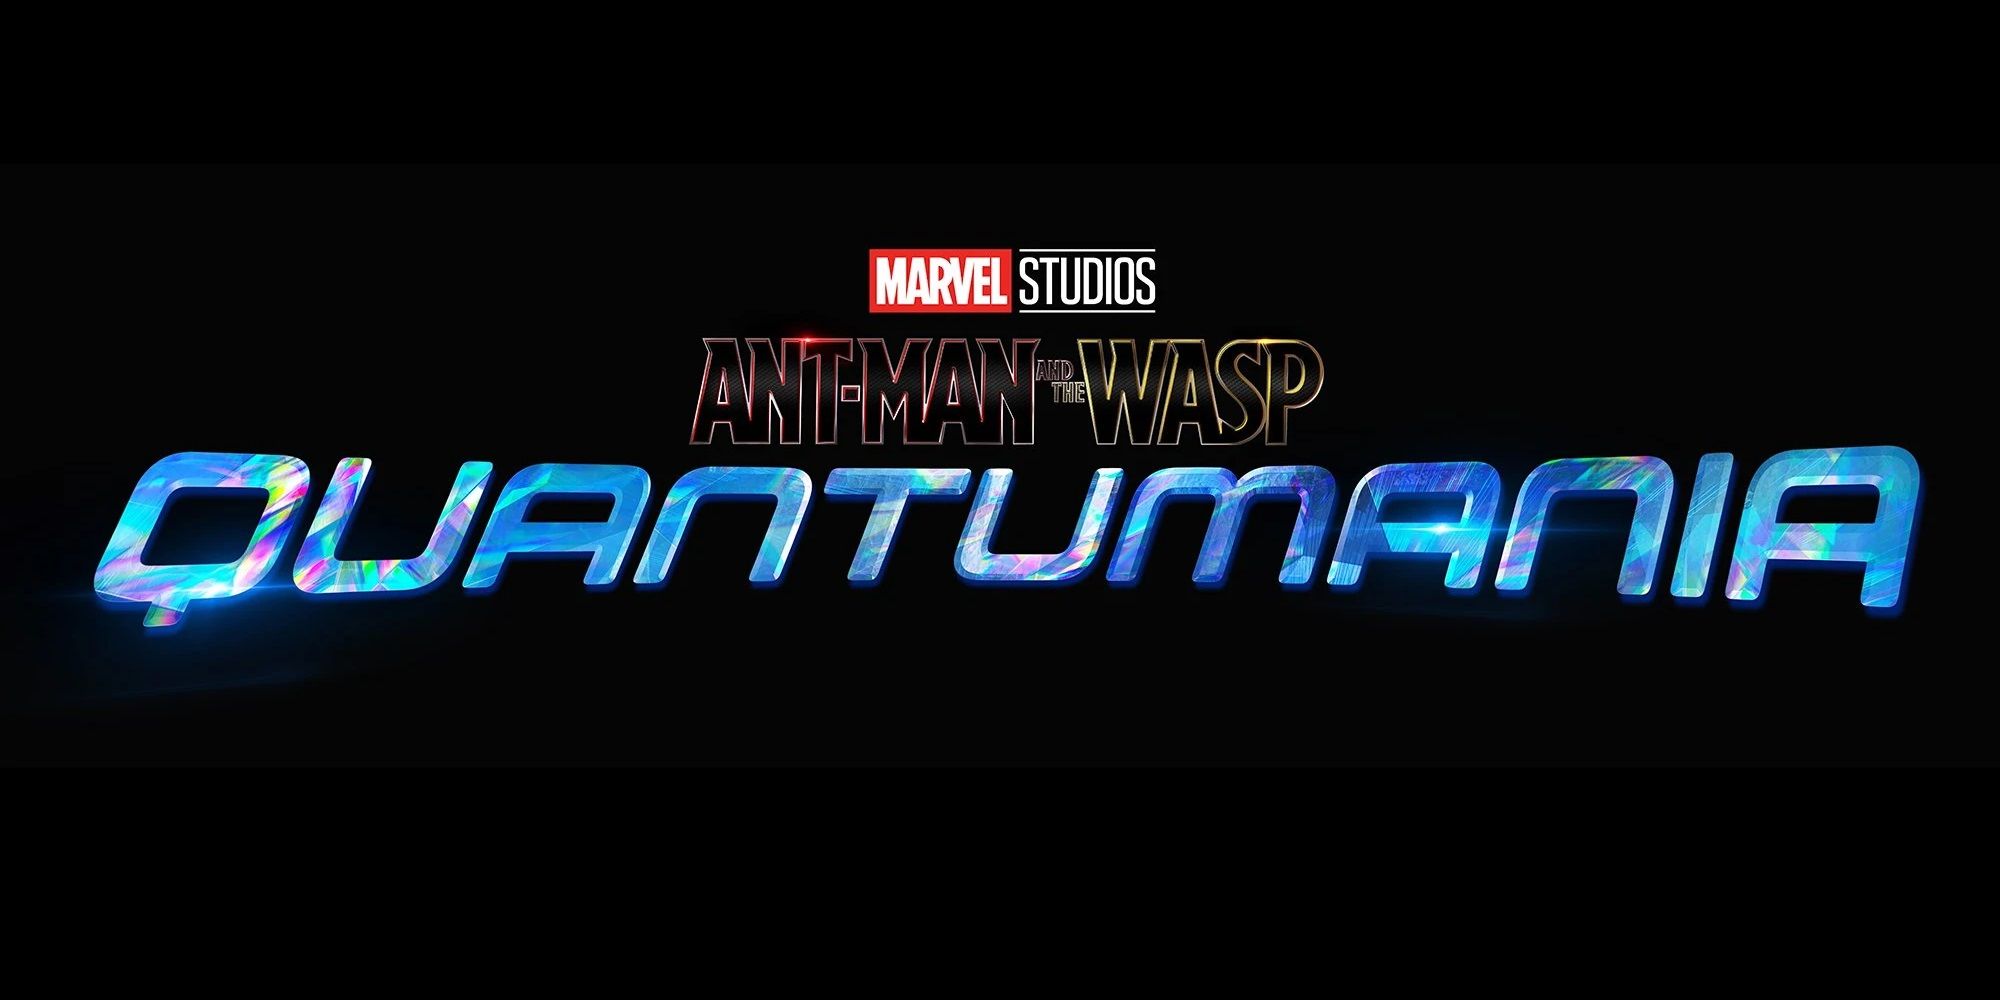 The logo for Marvel Studios' Ant-Man and the Wasp Quantumania